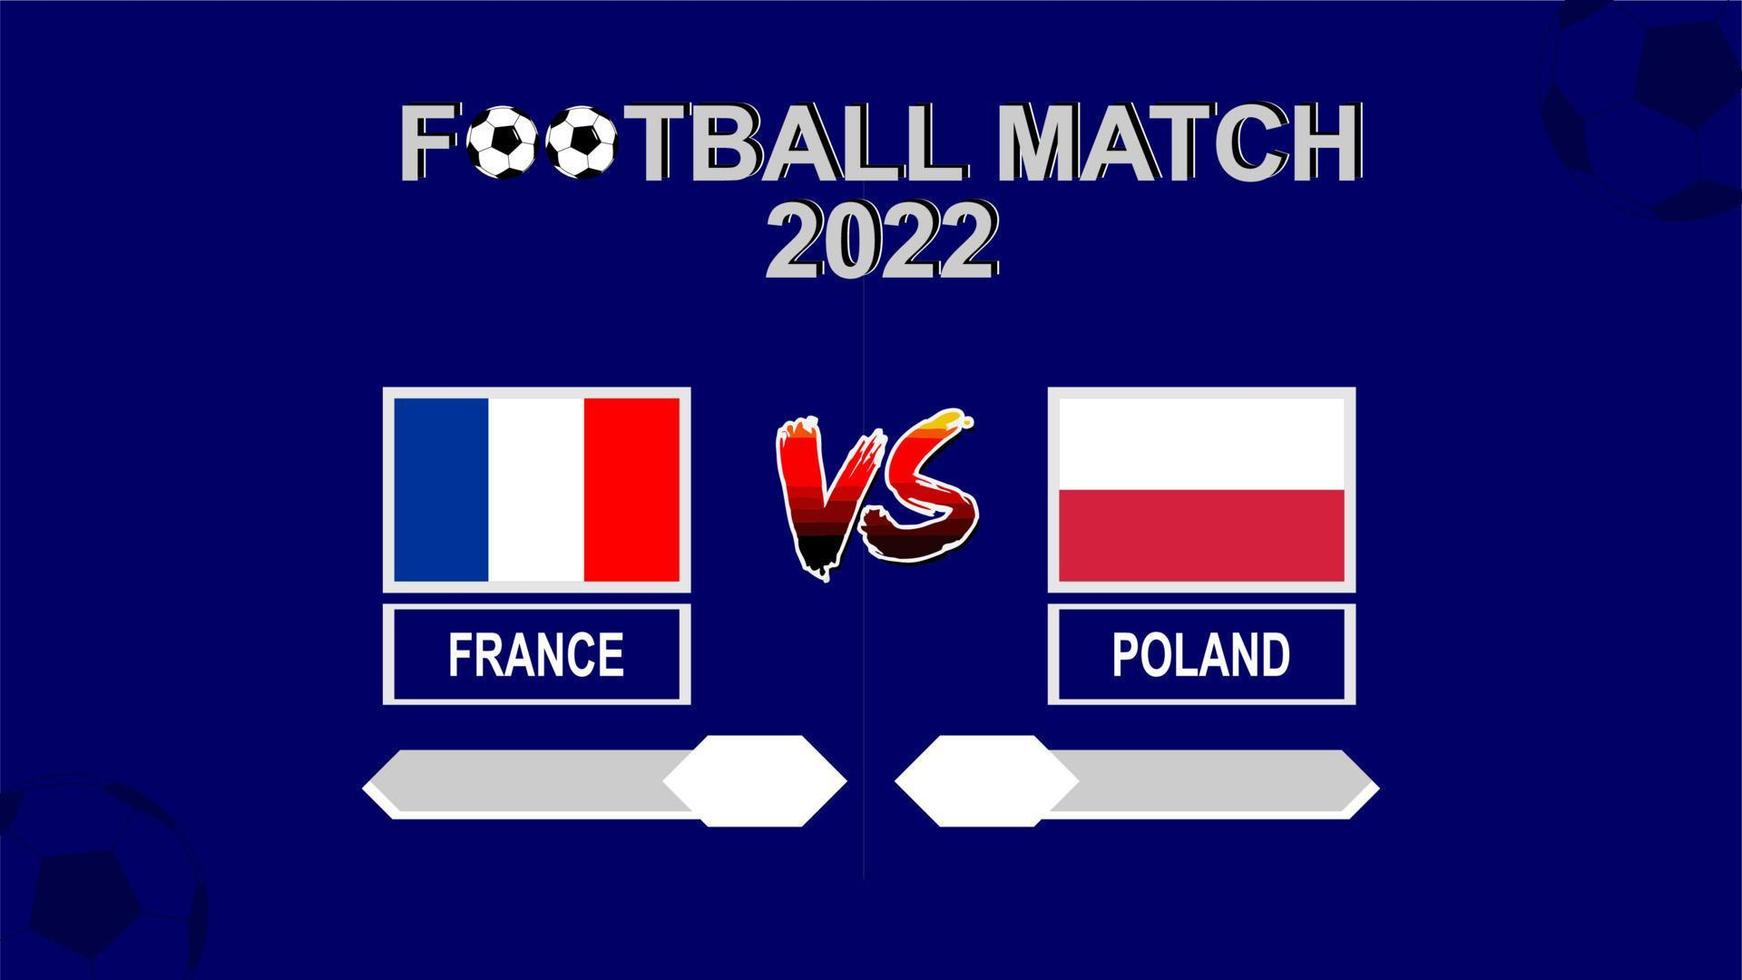 France vs Poland football cup 2022 blue template background vector for schedule or result match round of 16